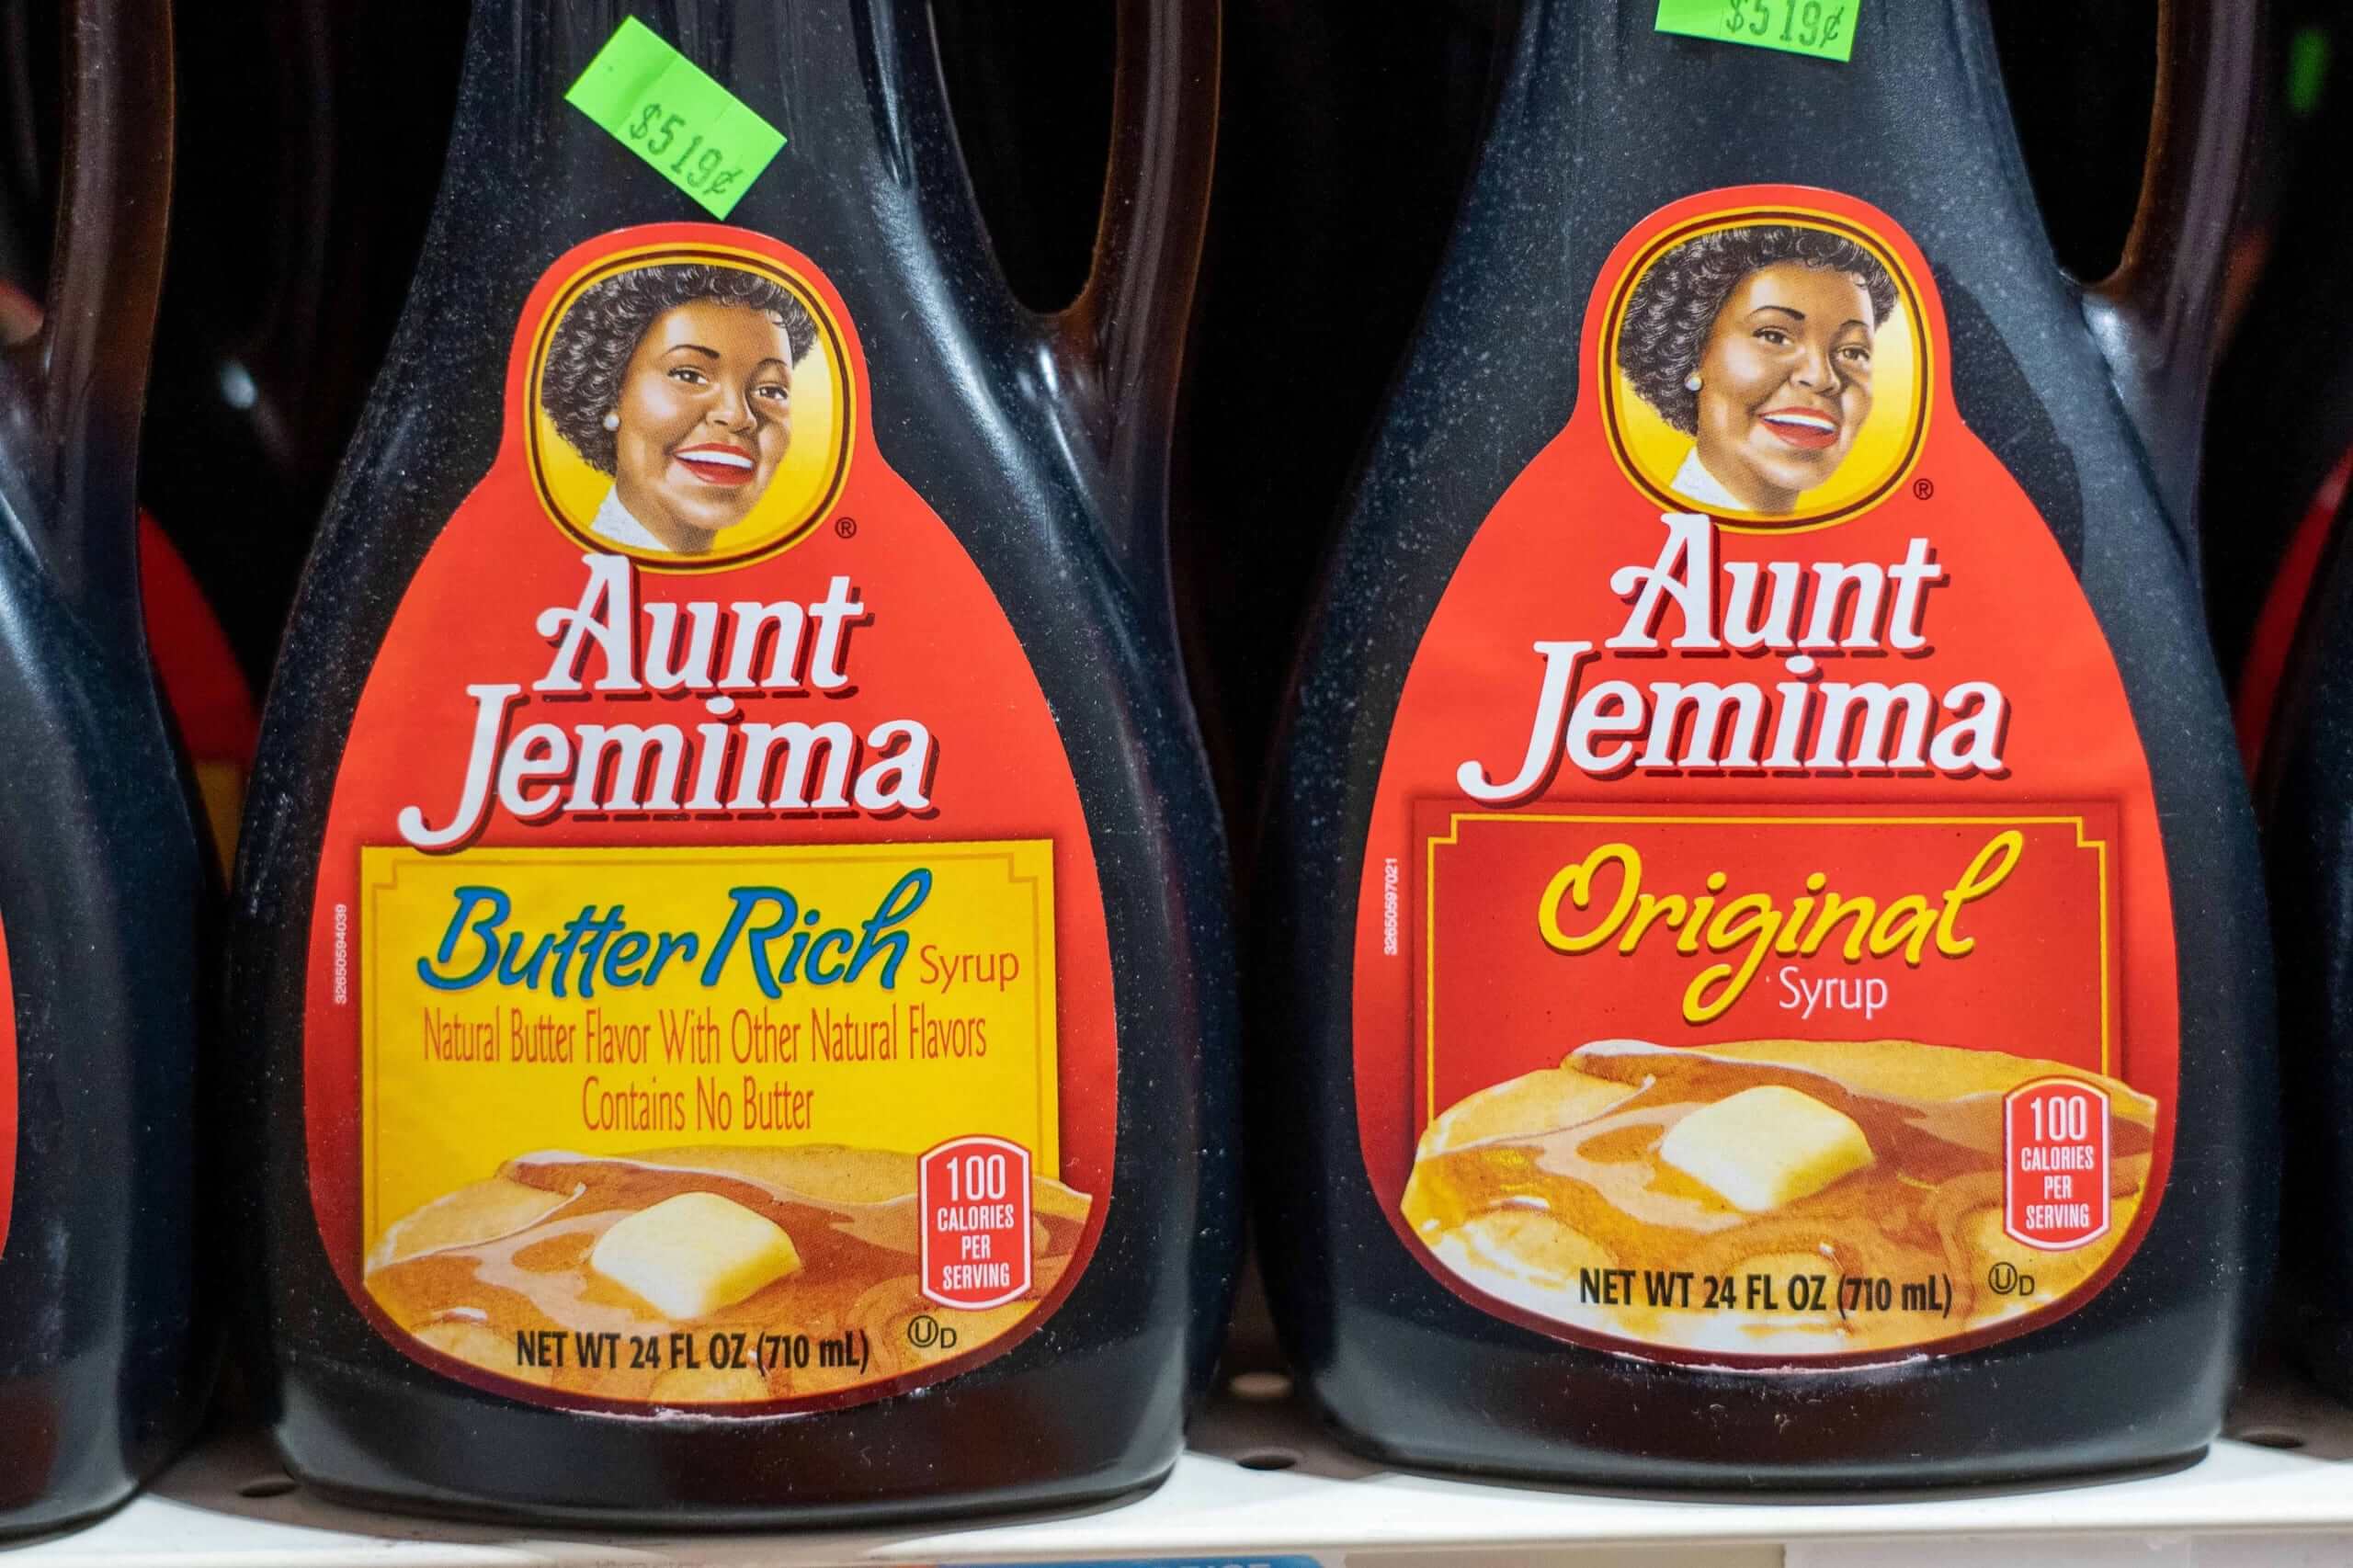 PepsiCo Announces Removal of Aunt Jemima Branding From All Products ...